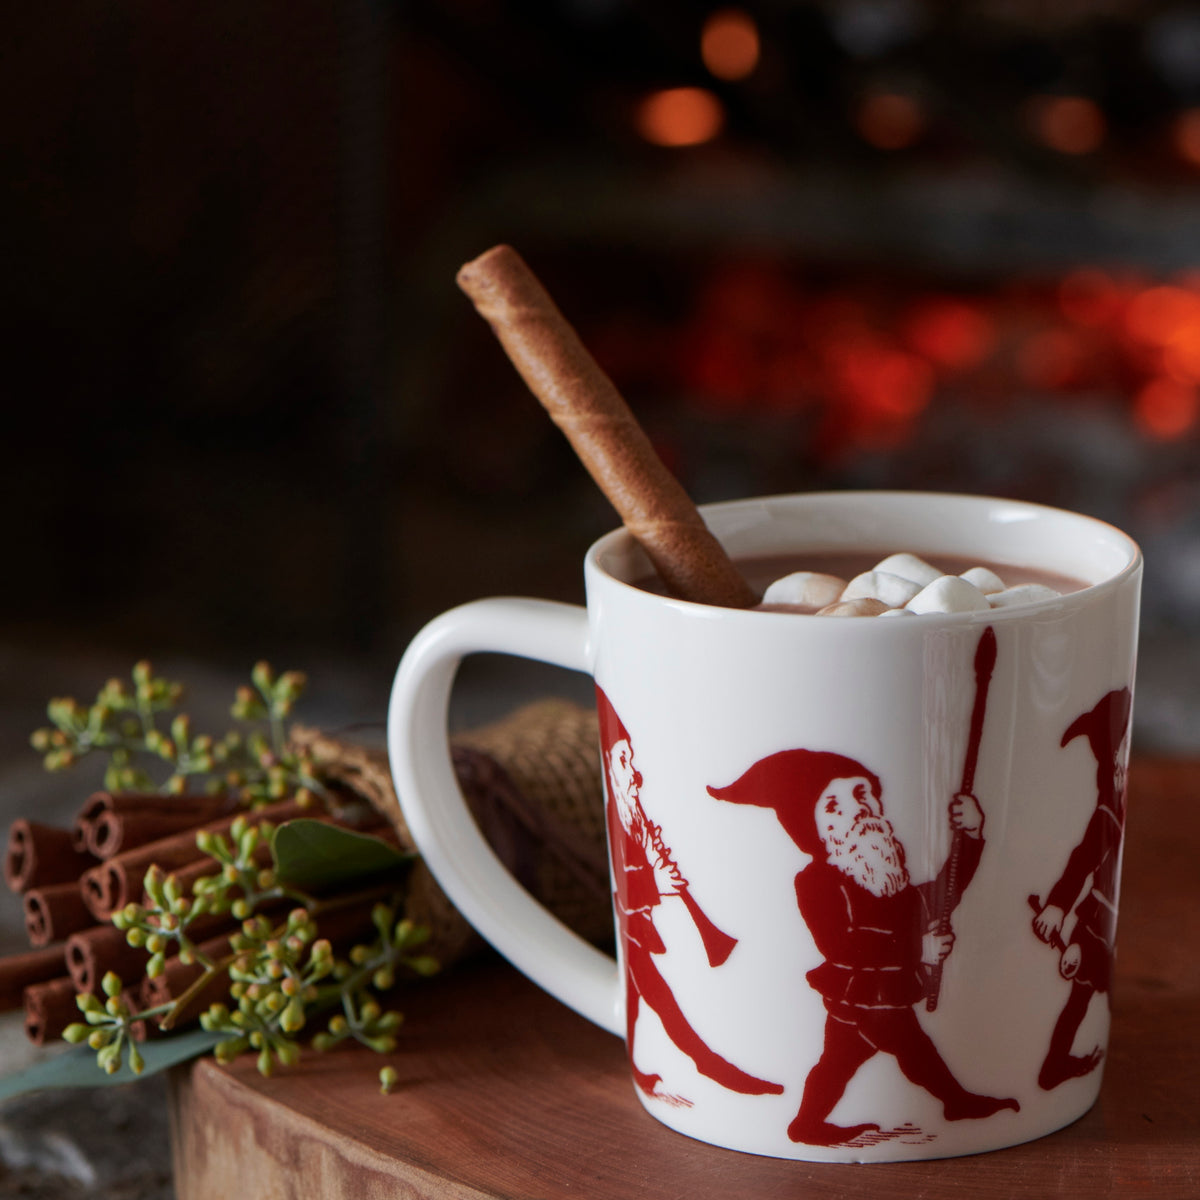 Hot chocolate with marshmallows and a cookie in a crimson and white porcelain Elves Mug from Caskata.